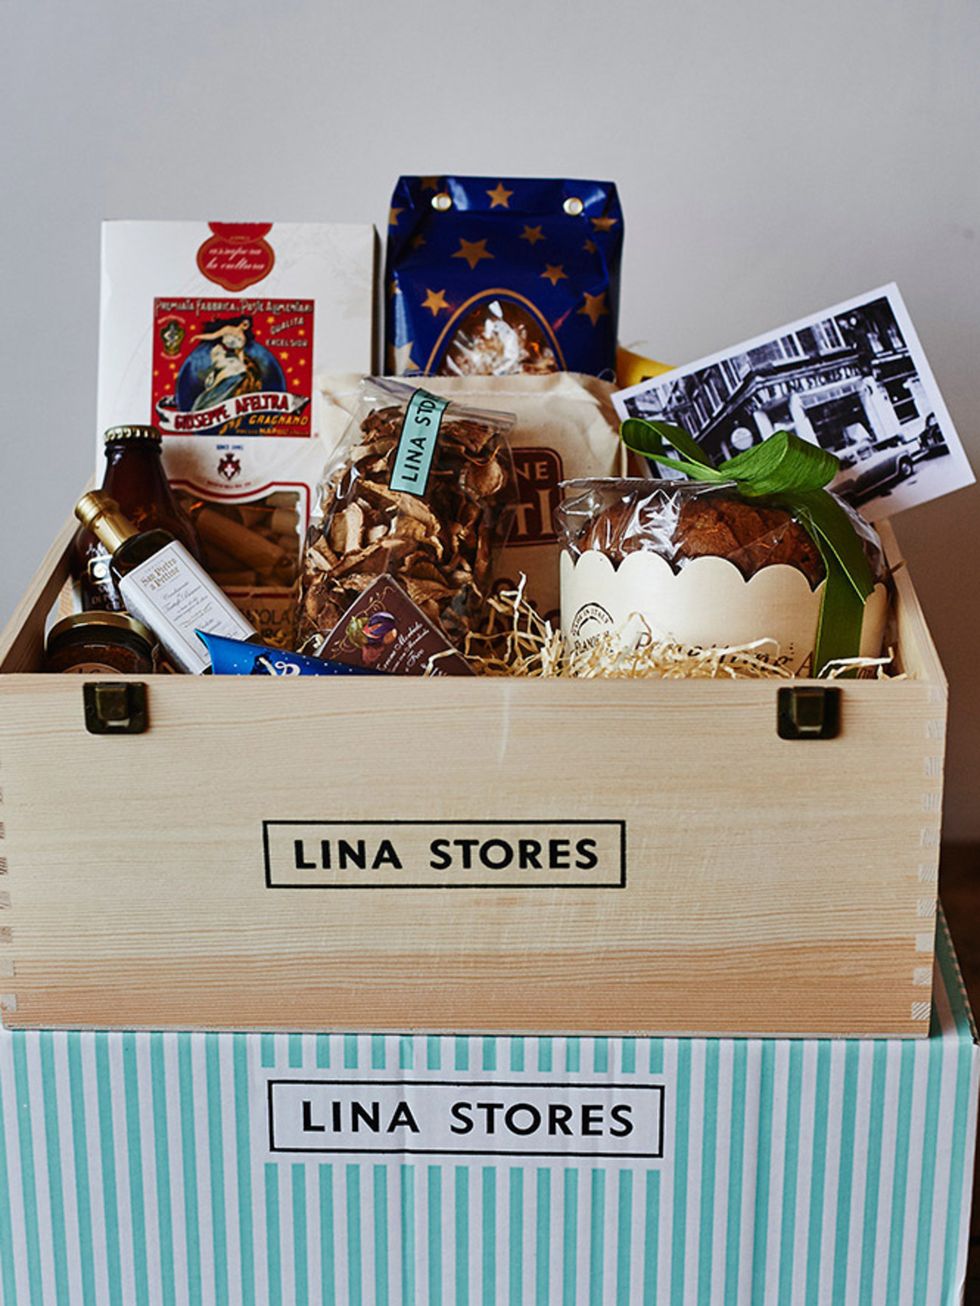 <p><strong>The Italian Job - <a href="http://linastores.co.uk" target="_blank">Lina Stores</a>, Medio, £65</strong></p>

<p>The packaging alone will make you want to snap up this box of goodies from one of Londons oldest delis. Some real little gems in h